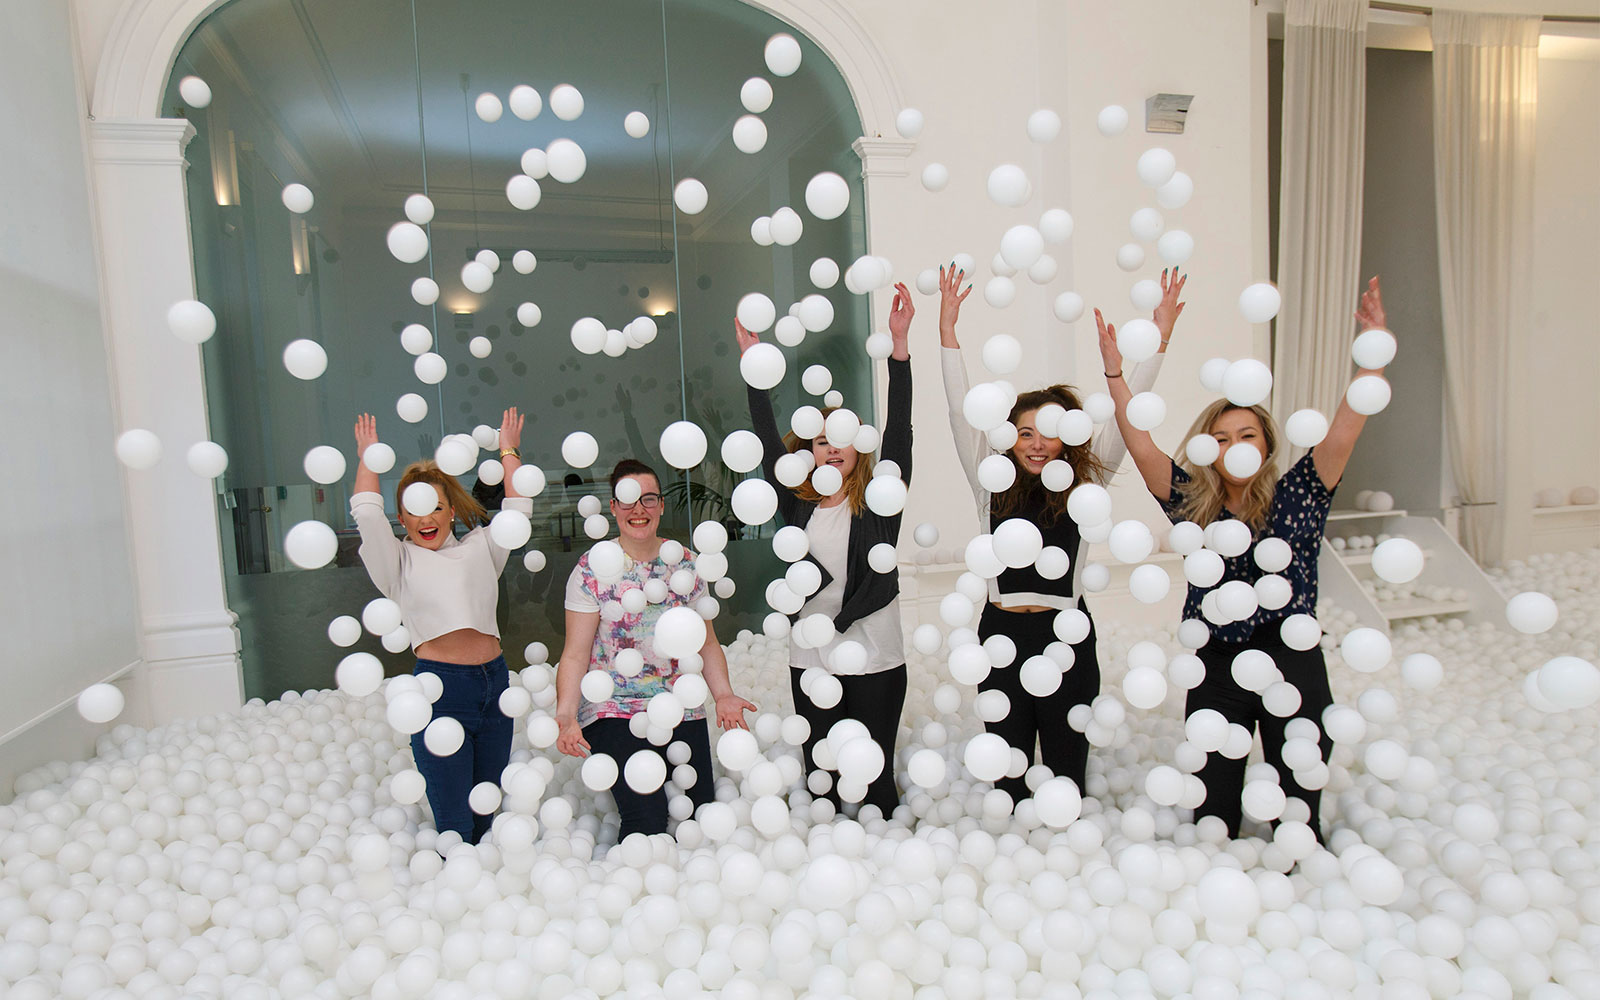 New York City Is Getting A Giant Ball Pit For Grown Ups